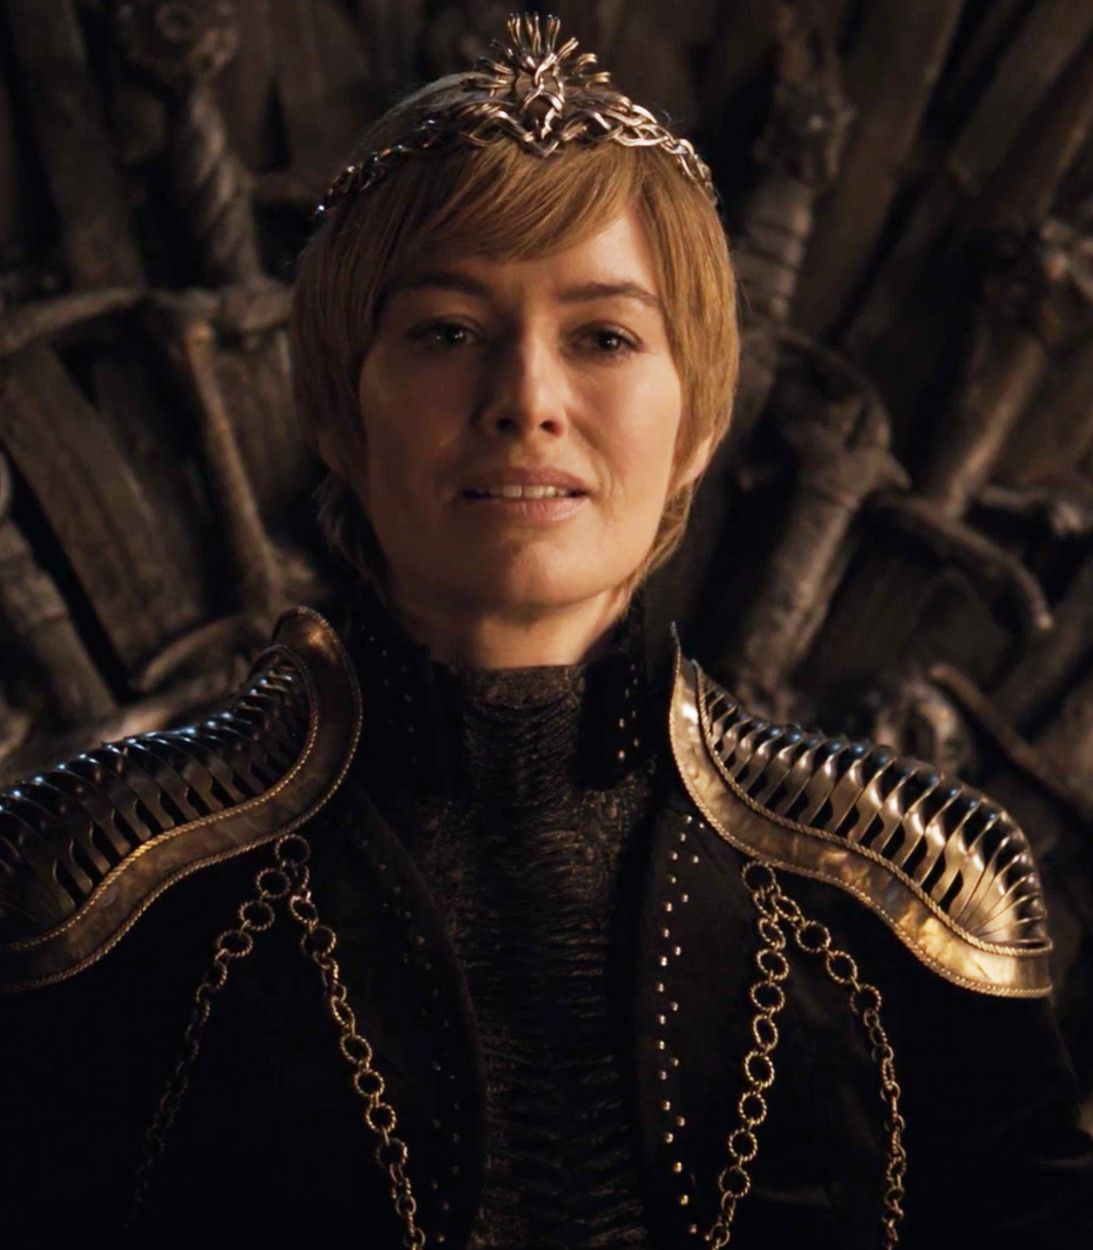 Lena Headey As Cersei Lannister In Game Of Thrones